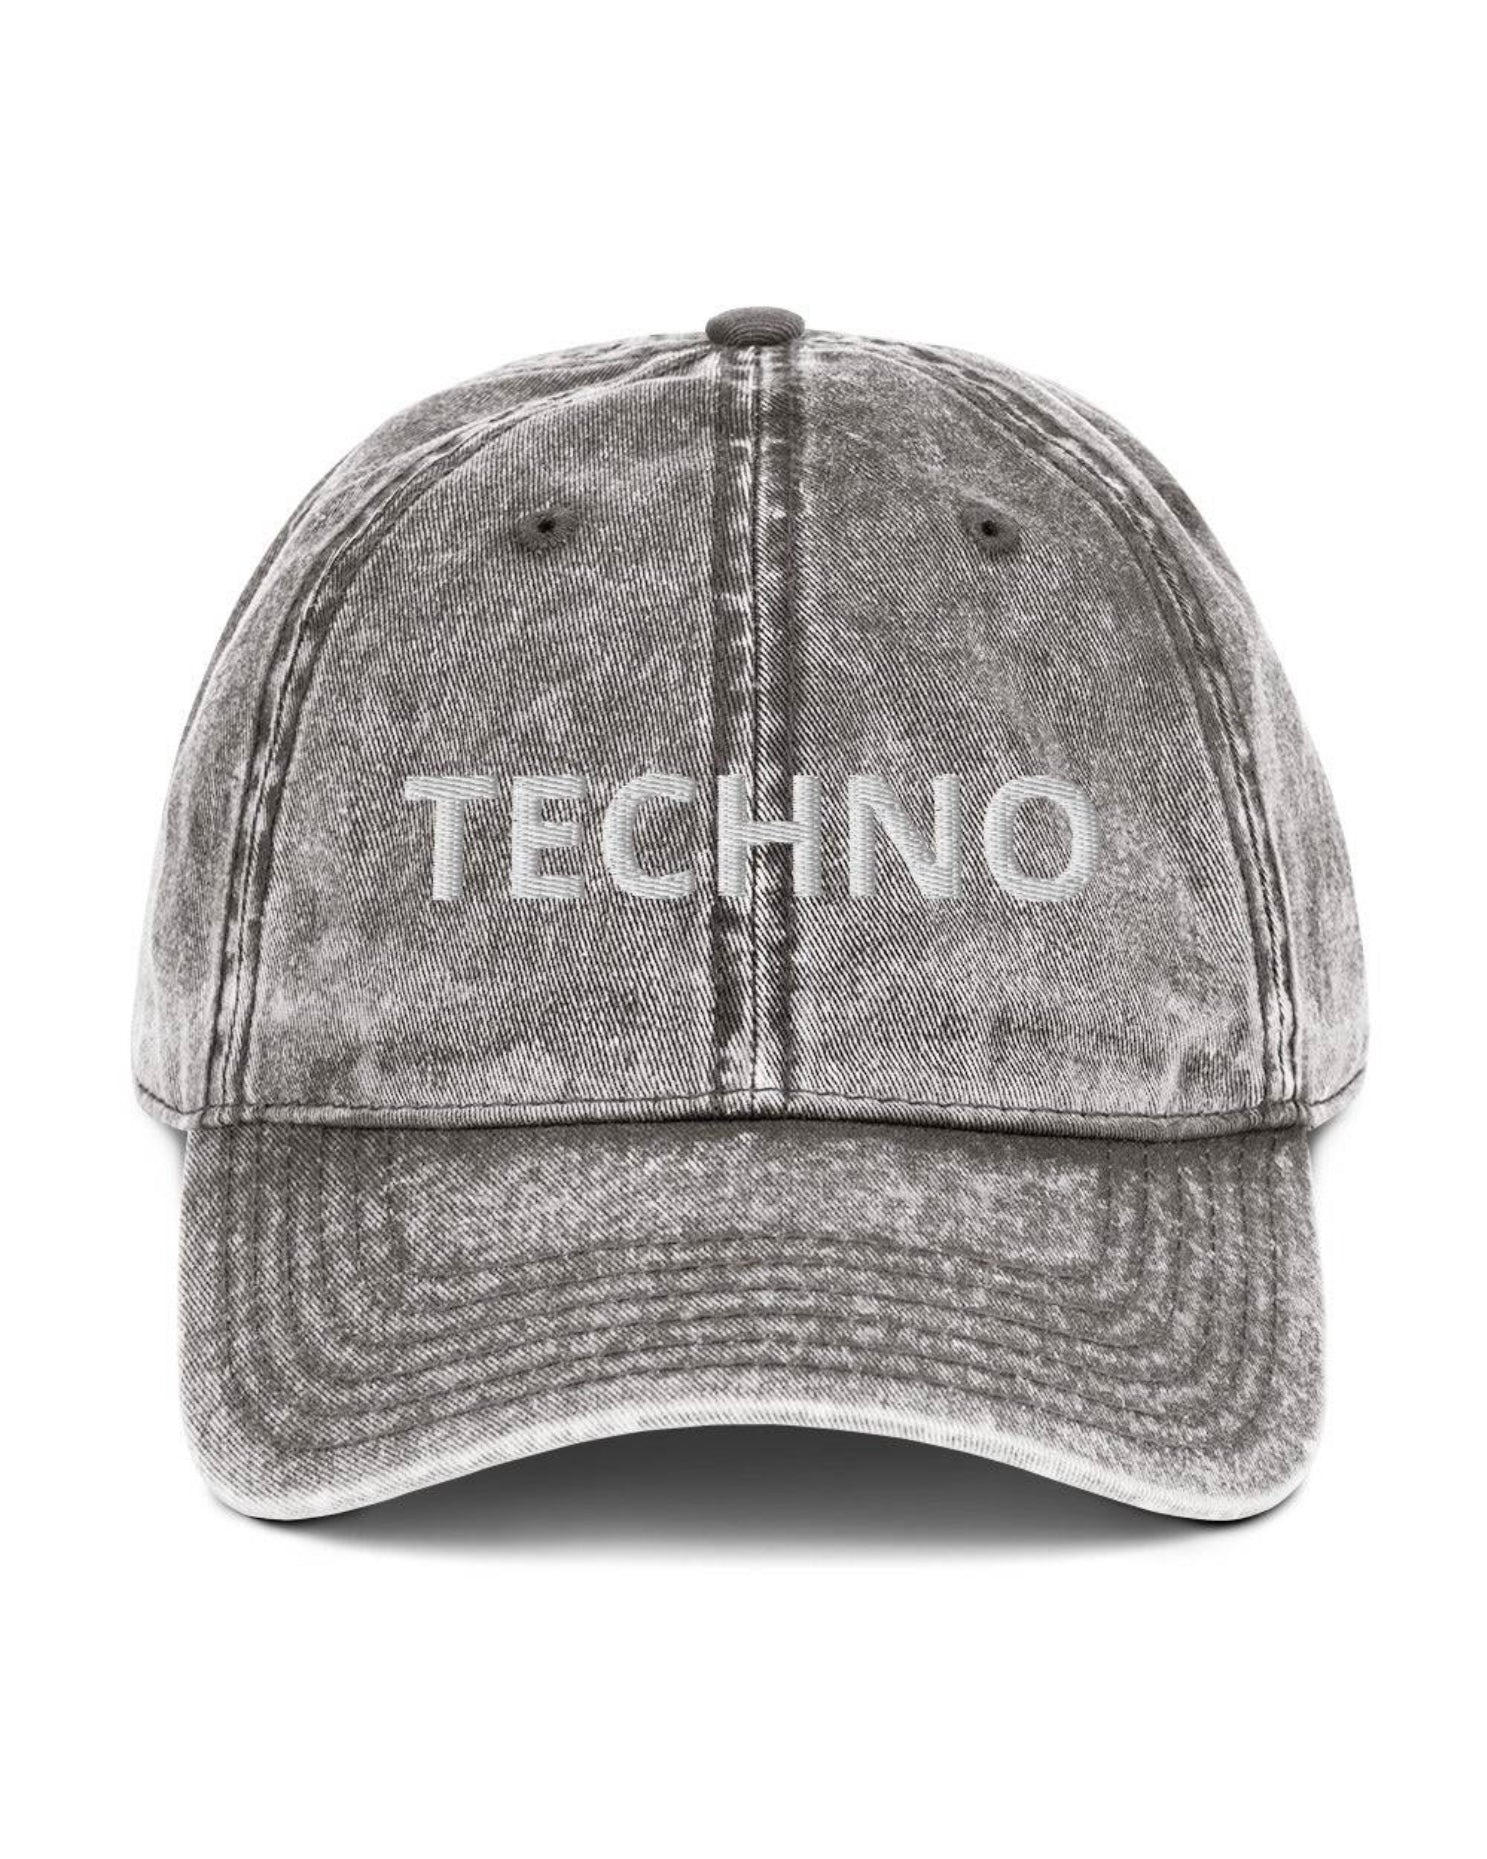 Techno Vintage Cotton Twill Cap, Dad Hat, - One Stop Rave